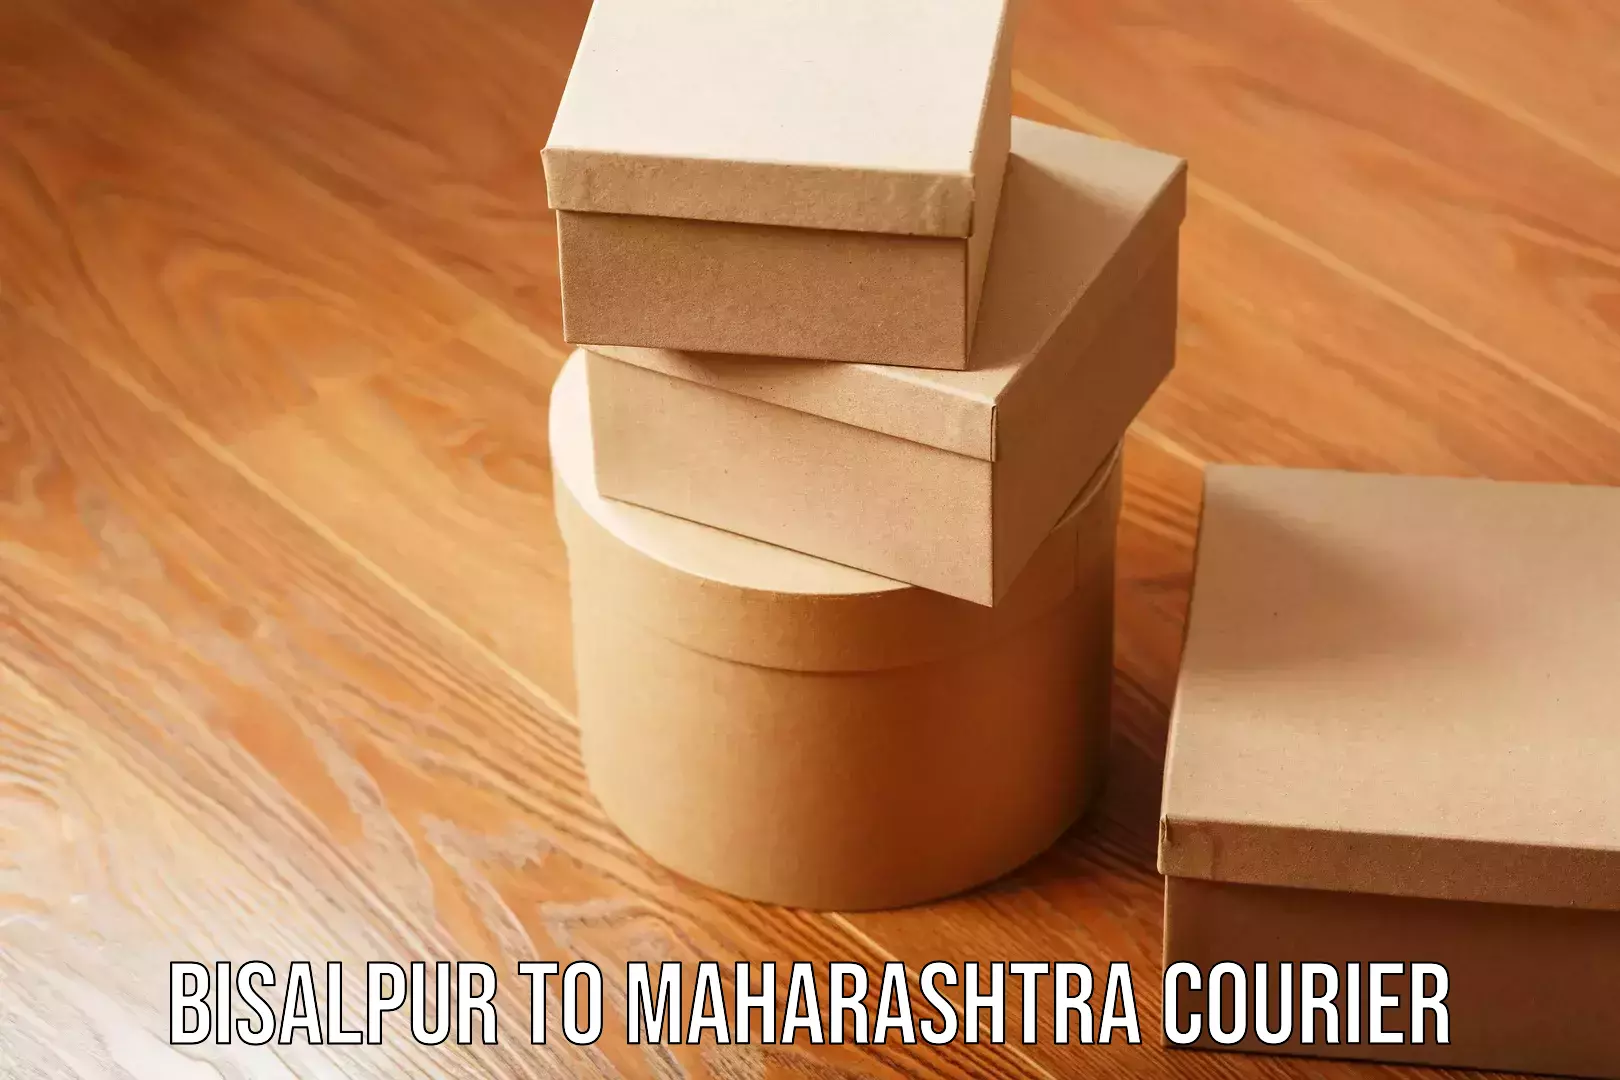 End-to-end delivery Bisalpur to Maharashtra